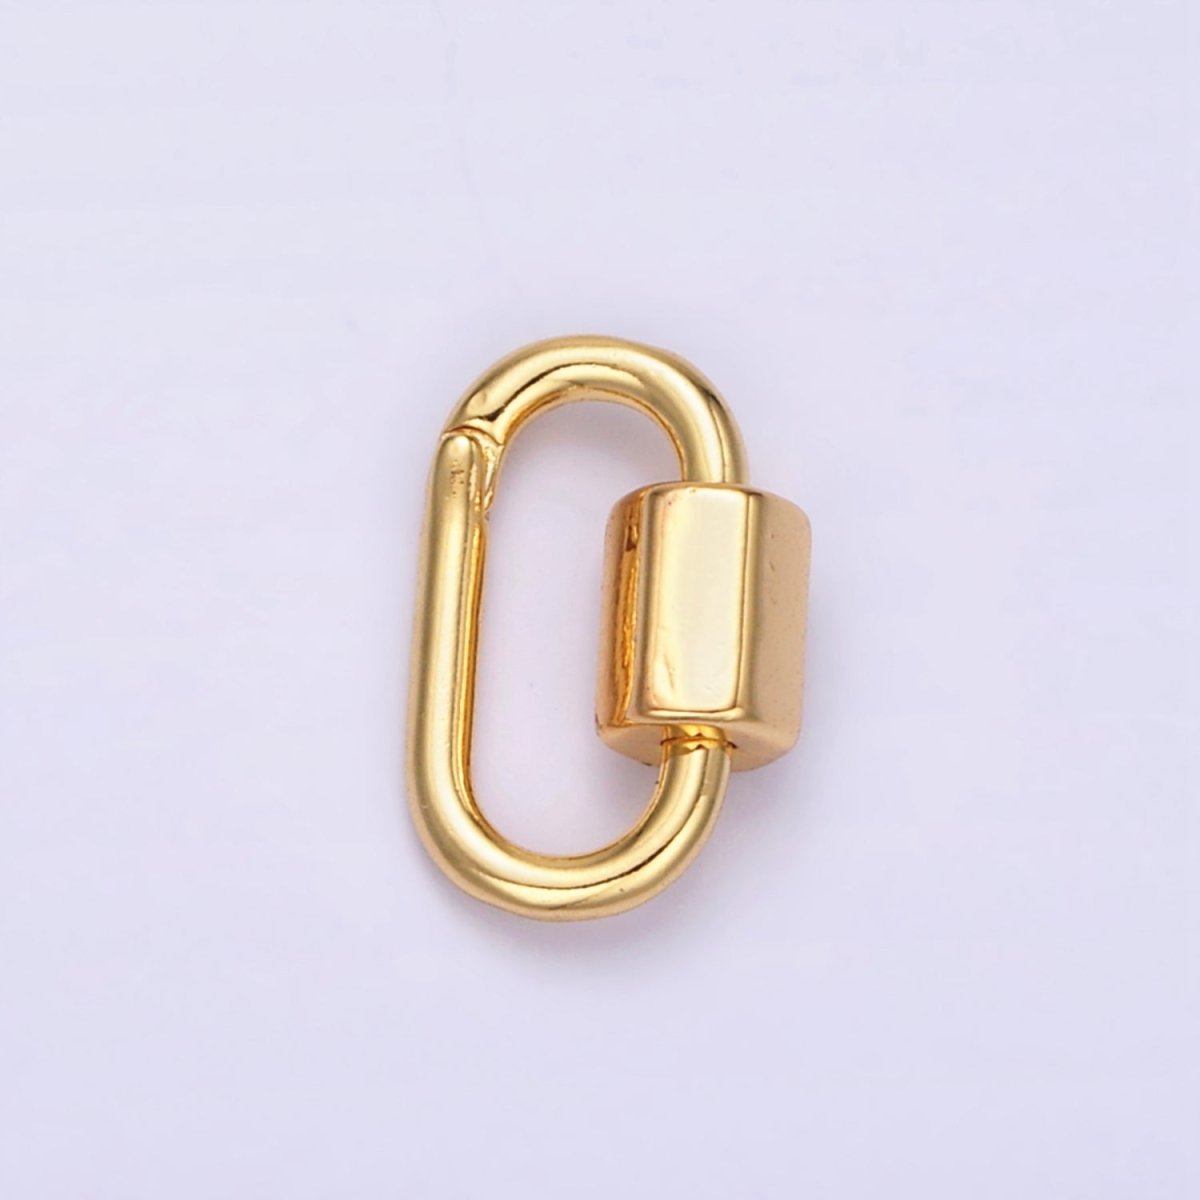 OS 14K Gold Filled 15mm Oval Snap Carabiner Minimalist Jewelry Finding Supply | Z573 - DLUXCA